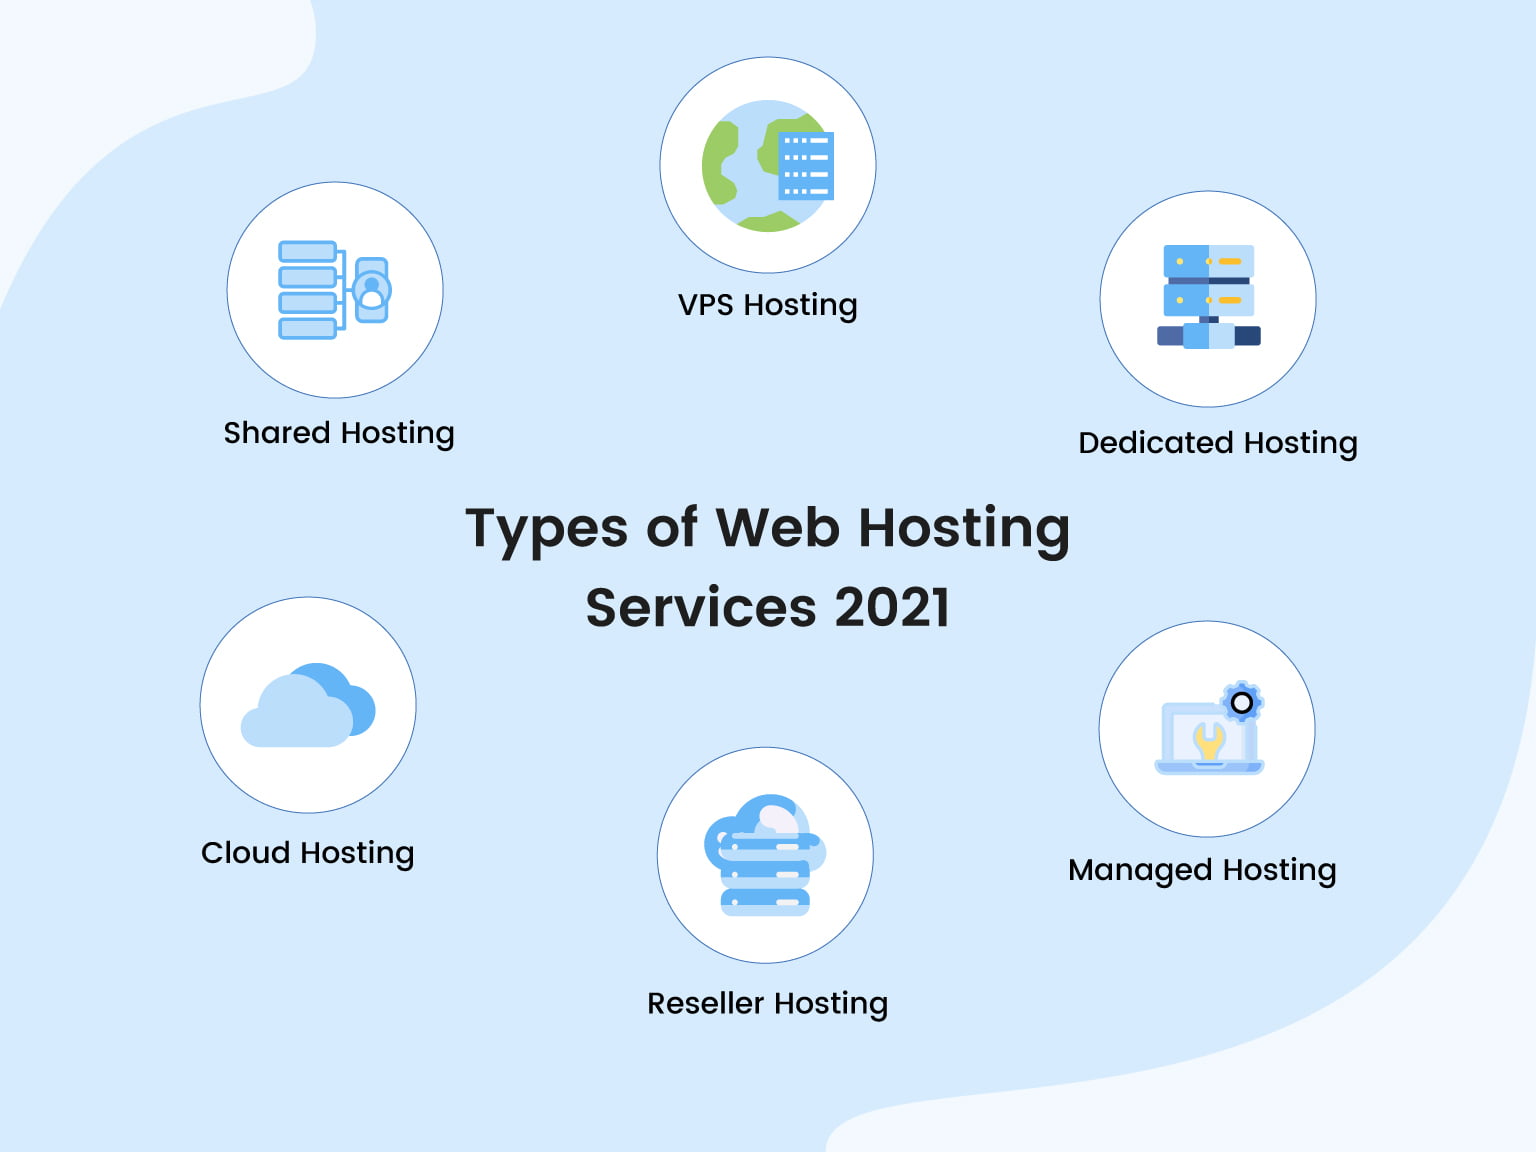 Types of Web Hosting Services 2021